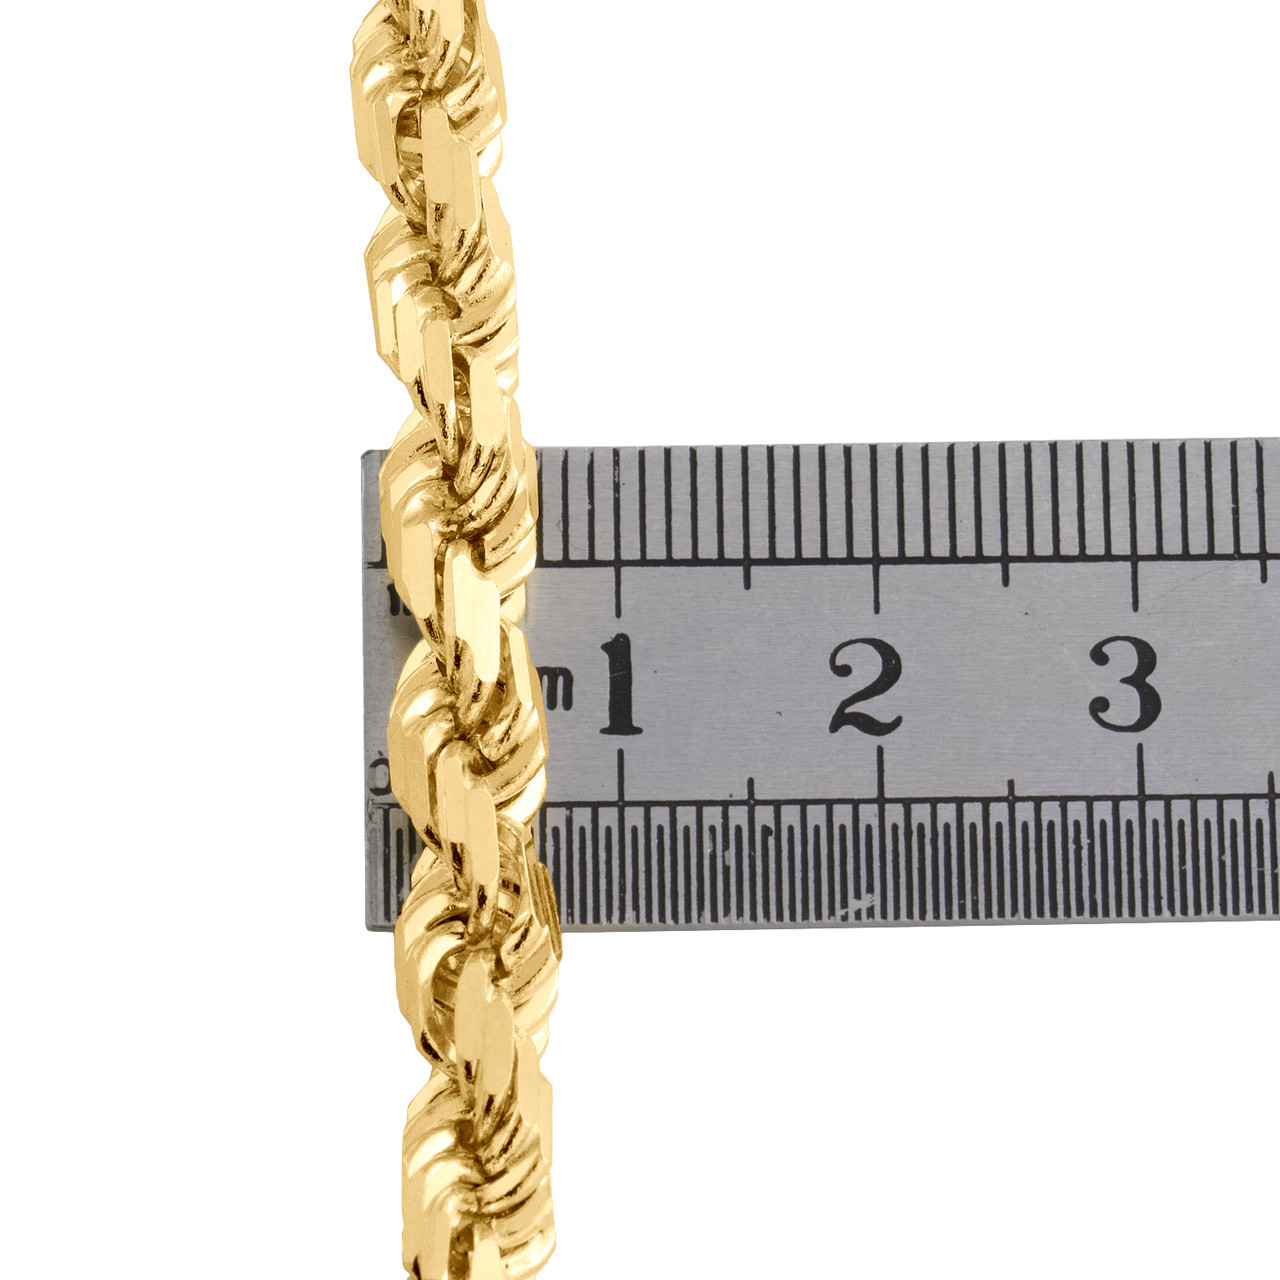 Solid 14K Yellow Gold Mens Rope Chain 7 mm 24 26 28 30 inches